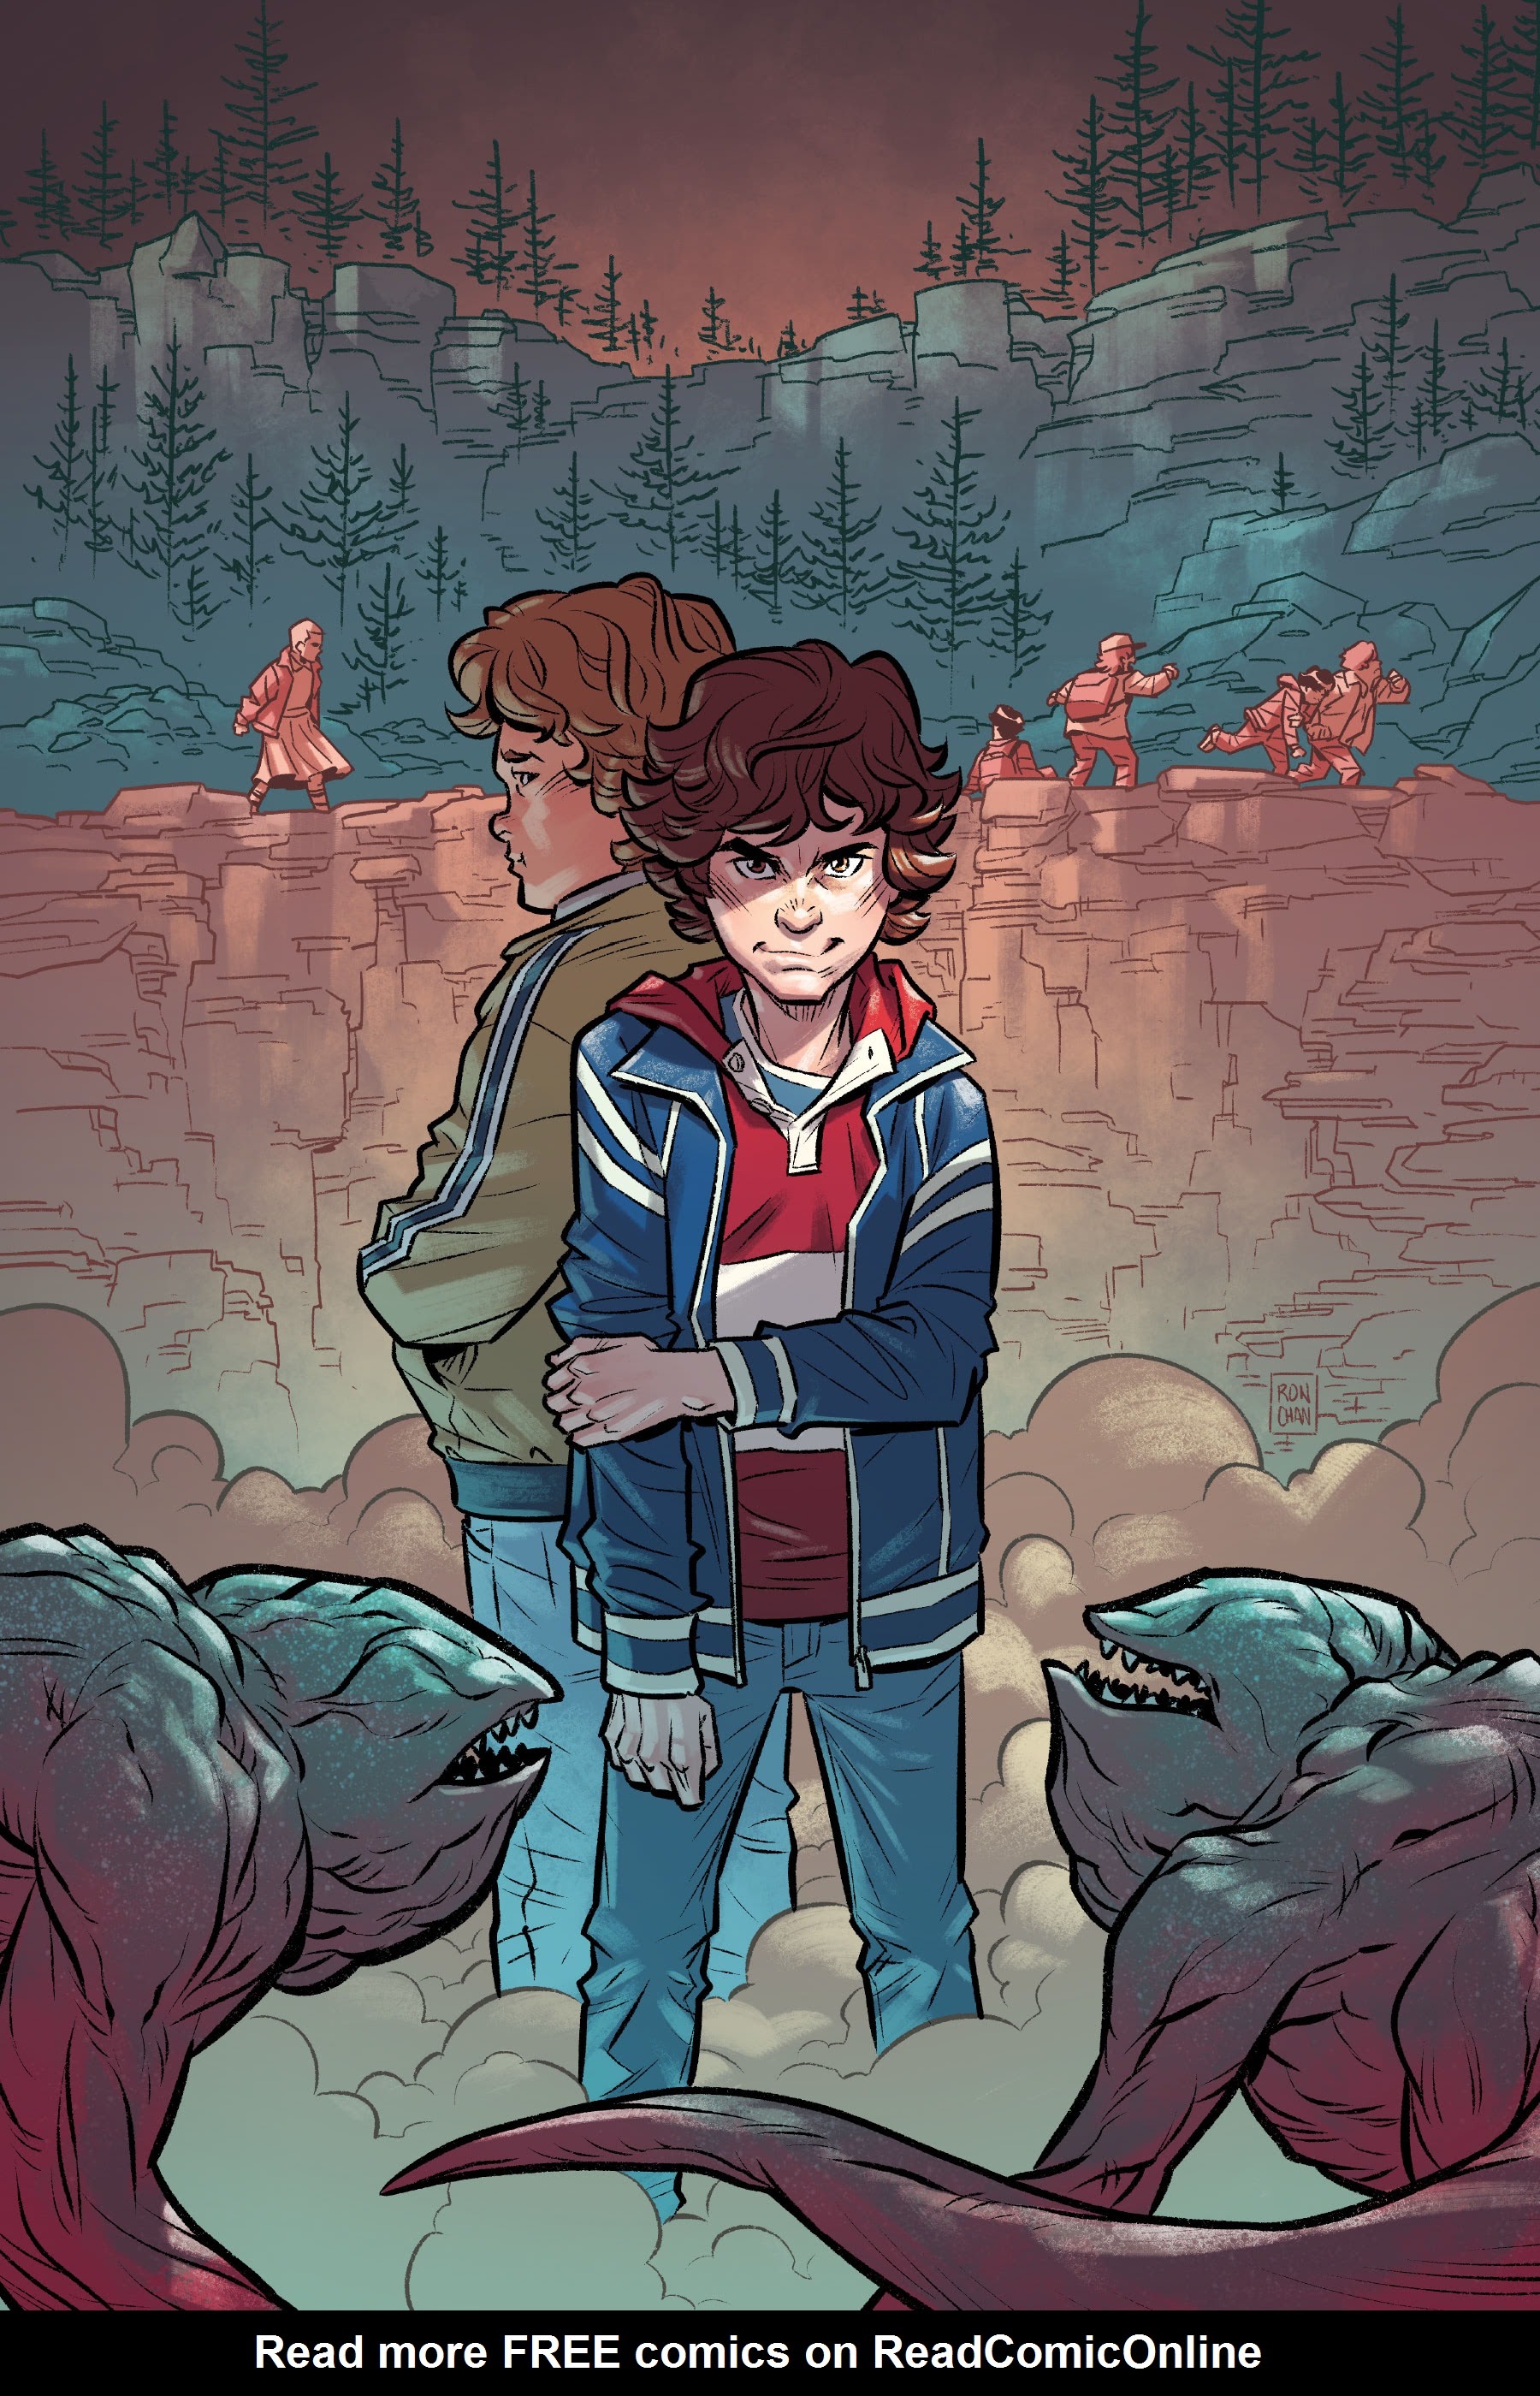 Read online Stranger Things: The Bully comic -  Issue # TPB - 5